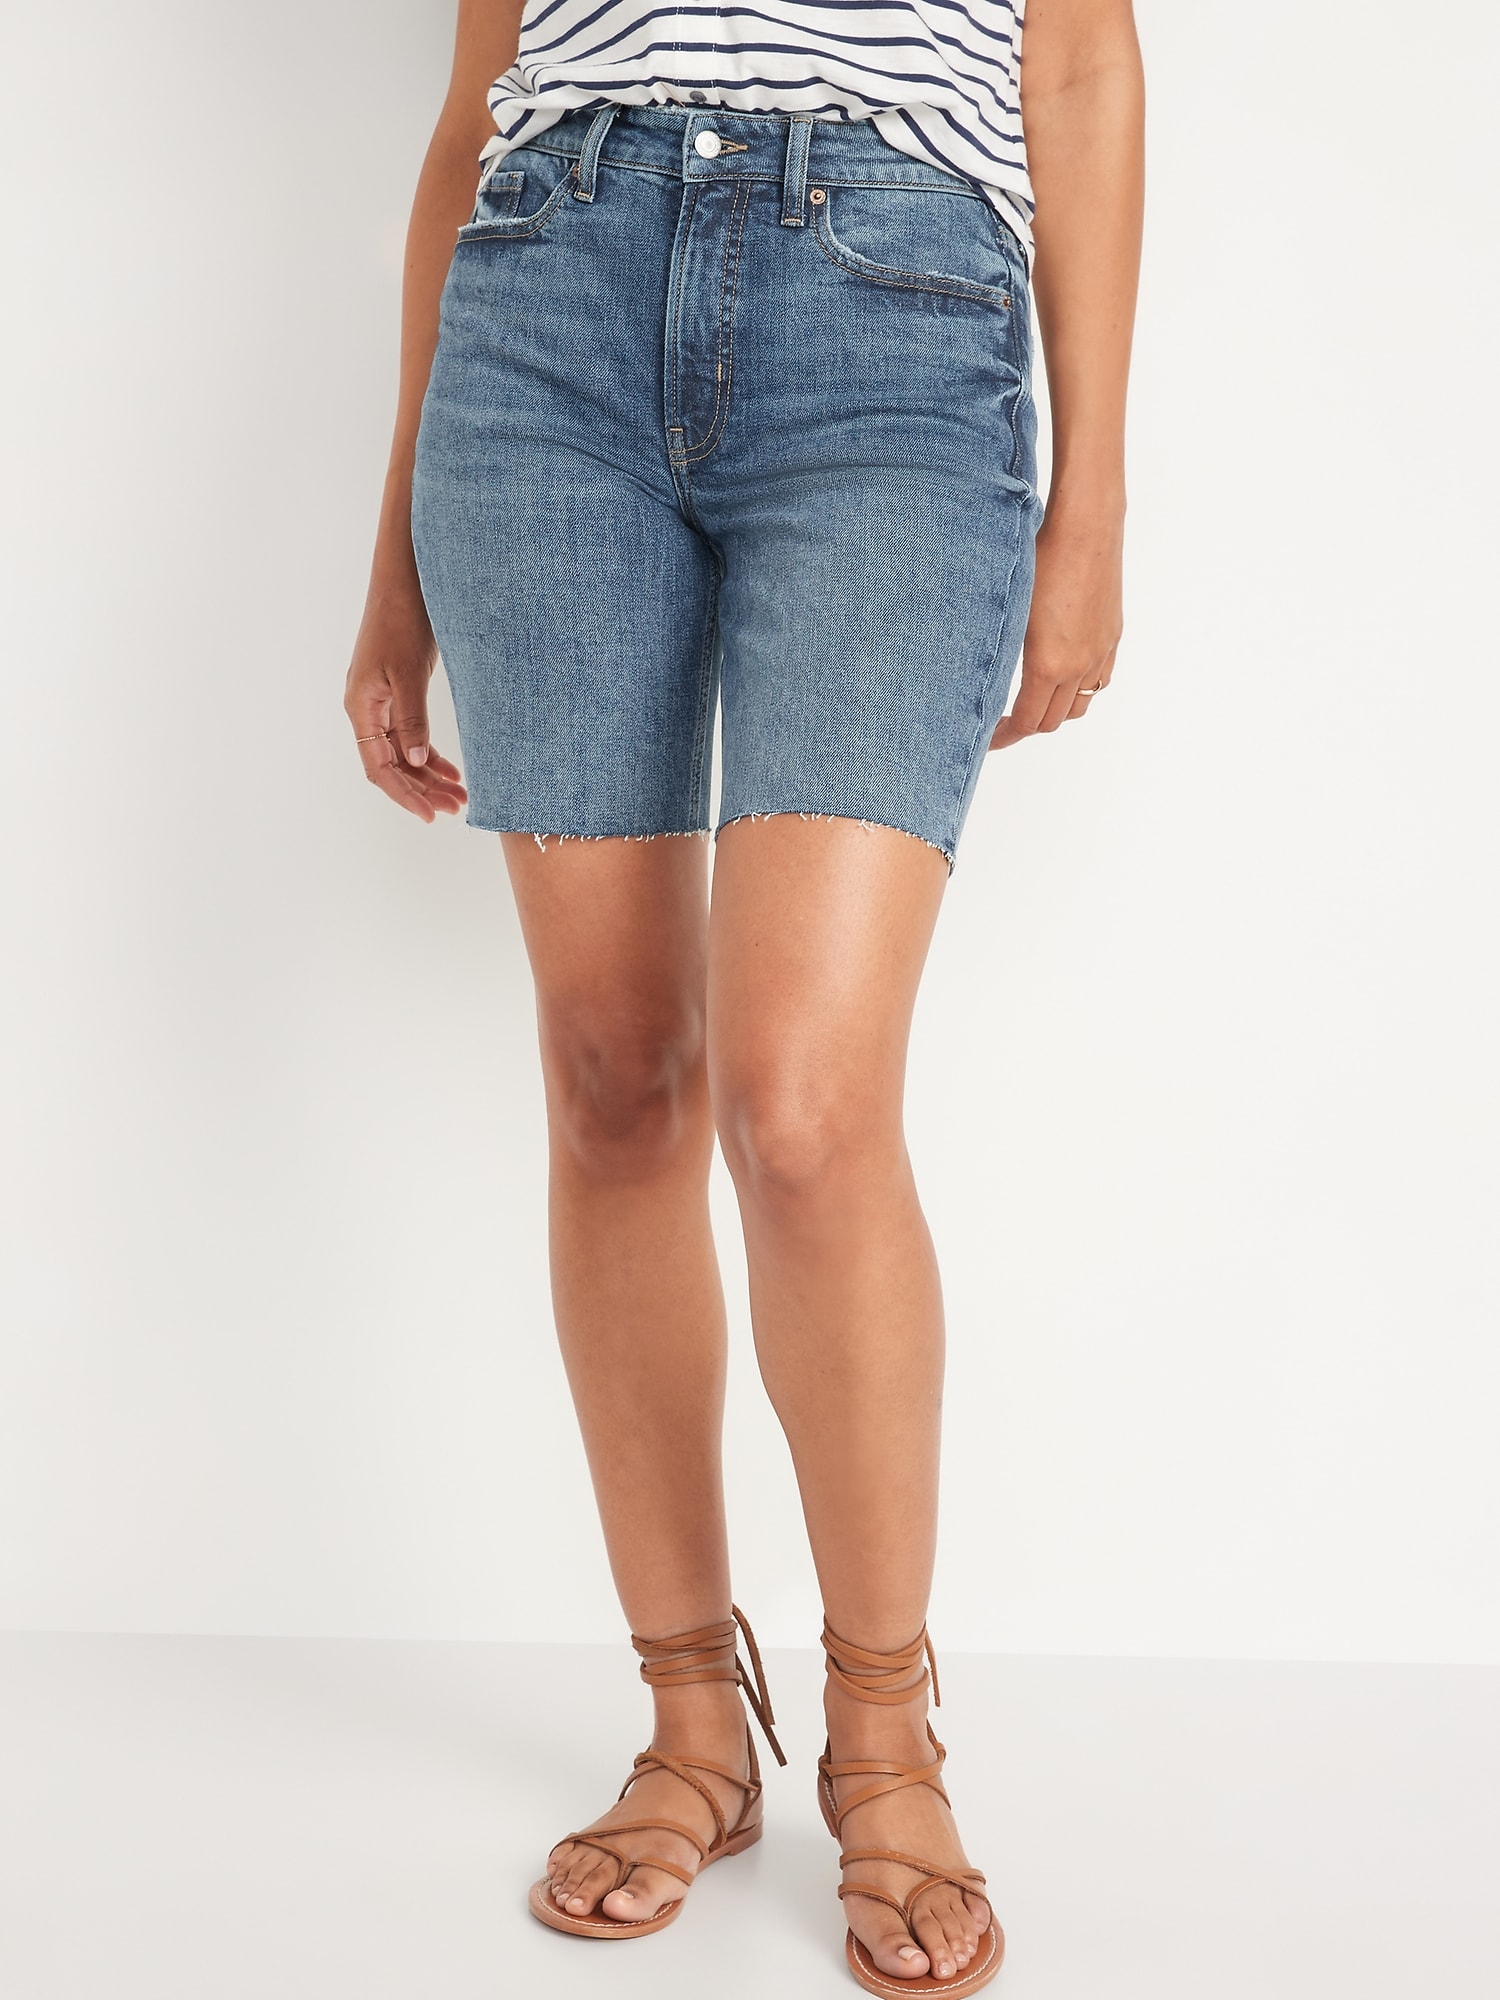 Highwaisted Denim Short With Belt with 30% discount!